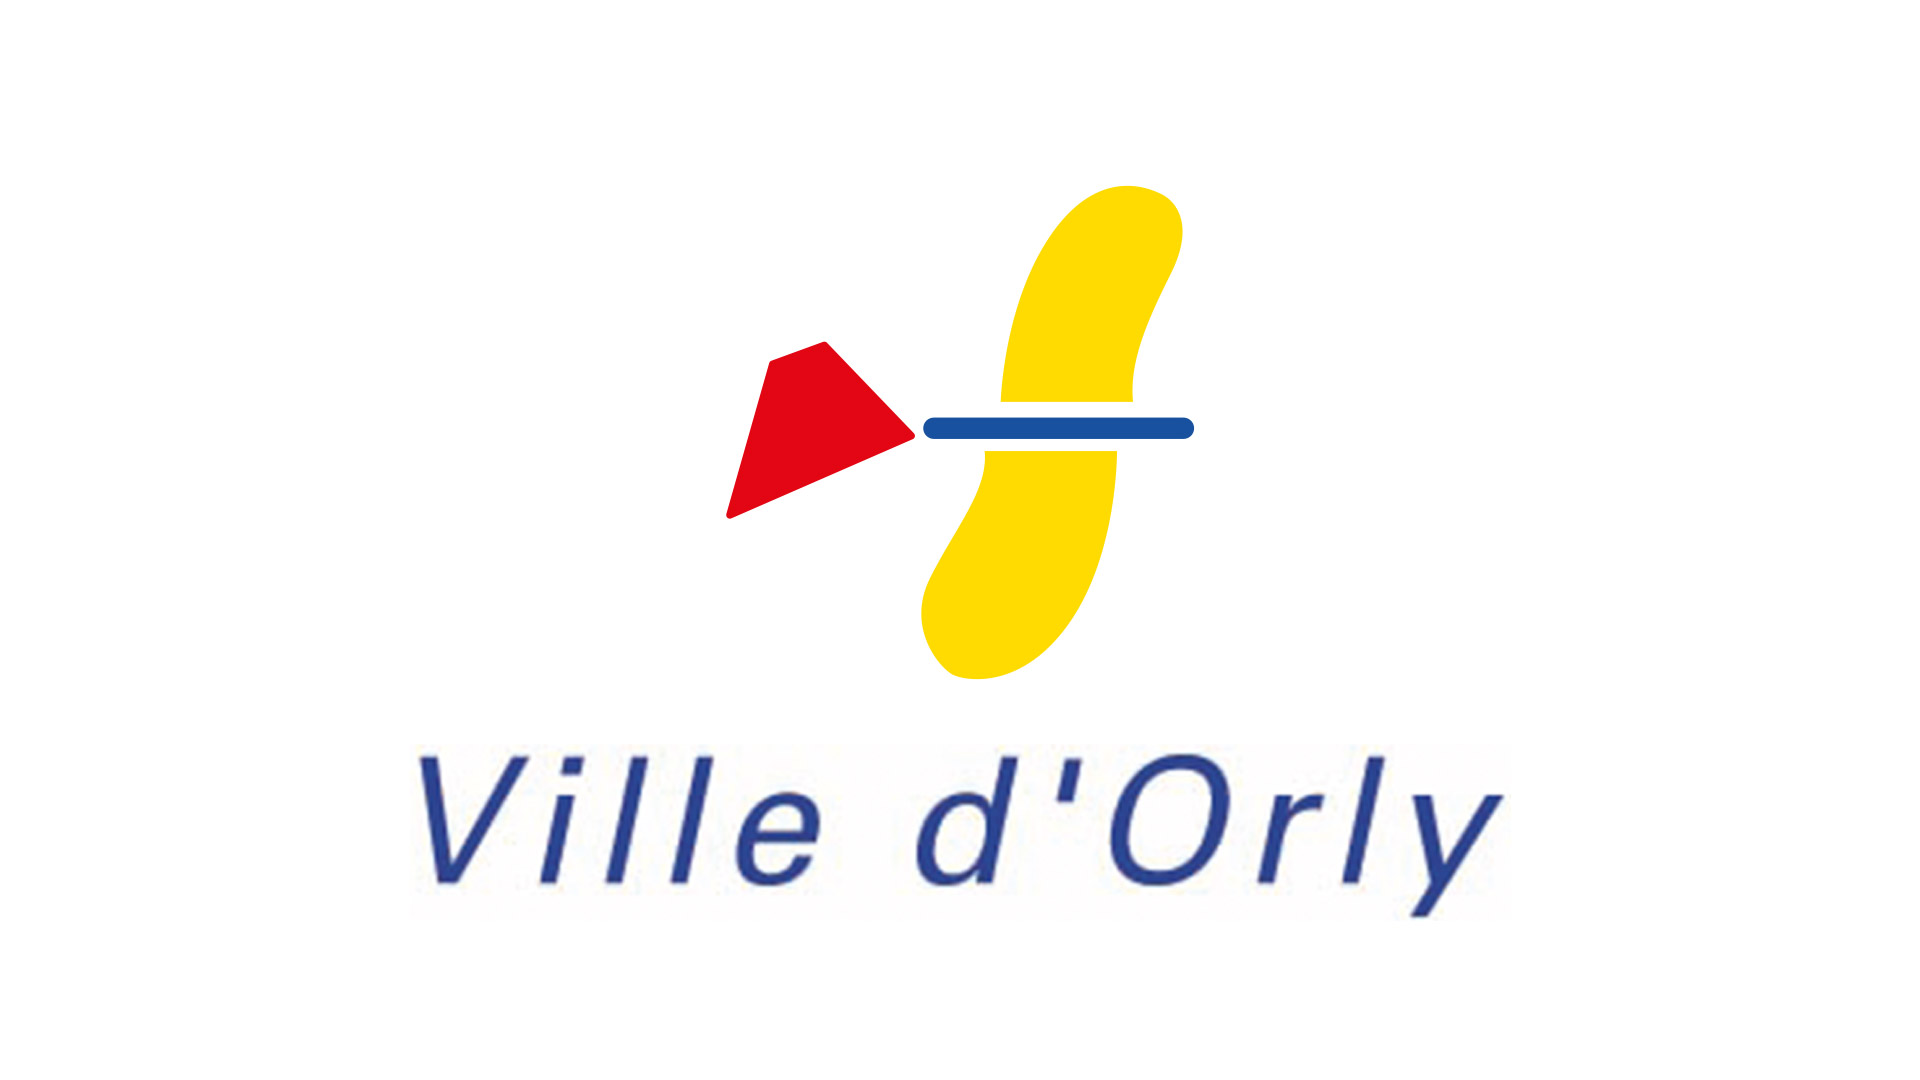 orly ville